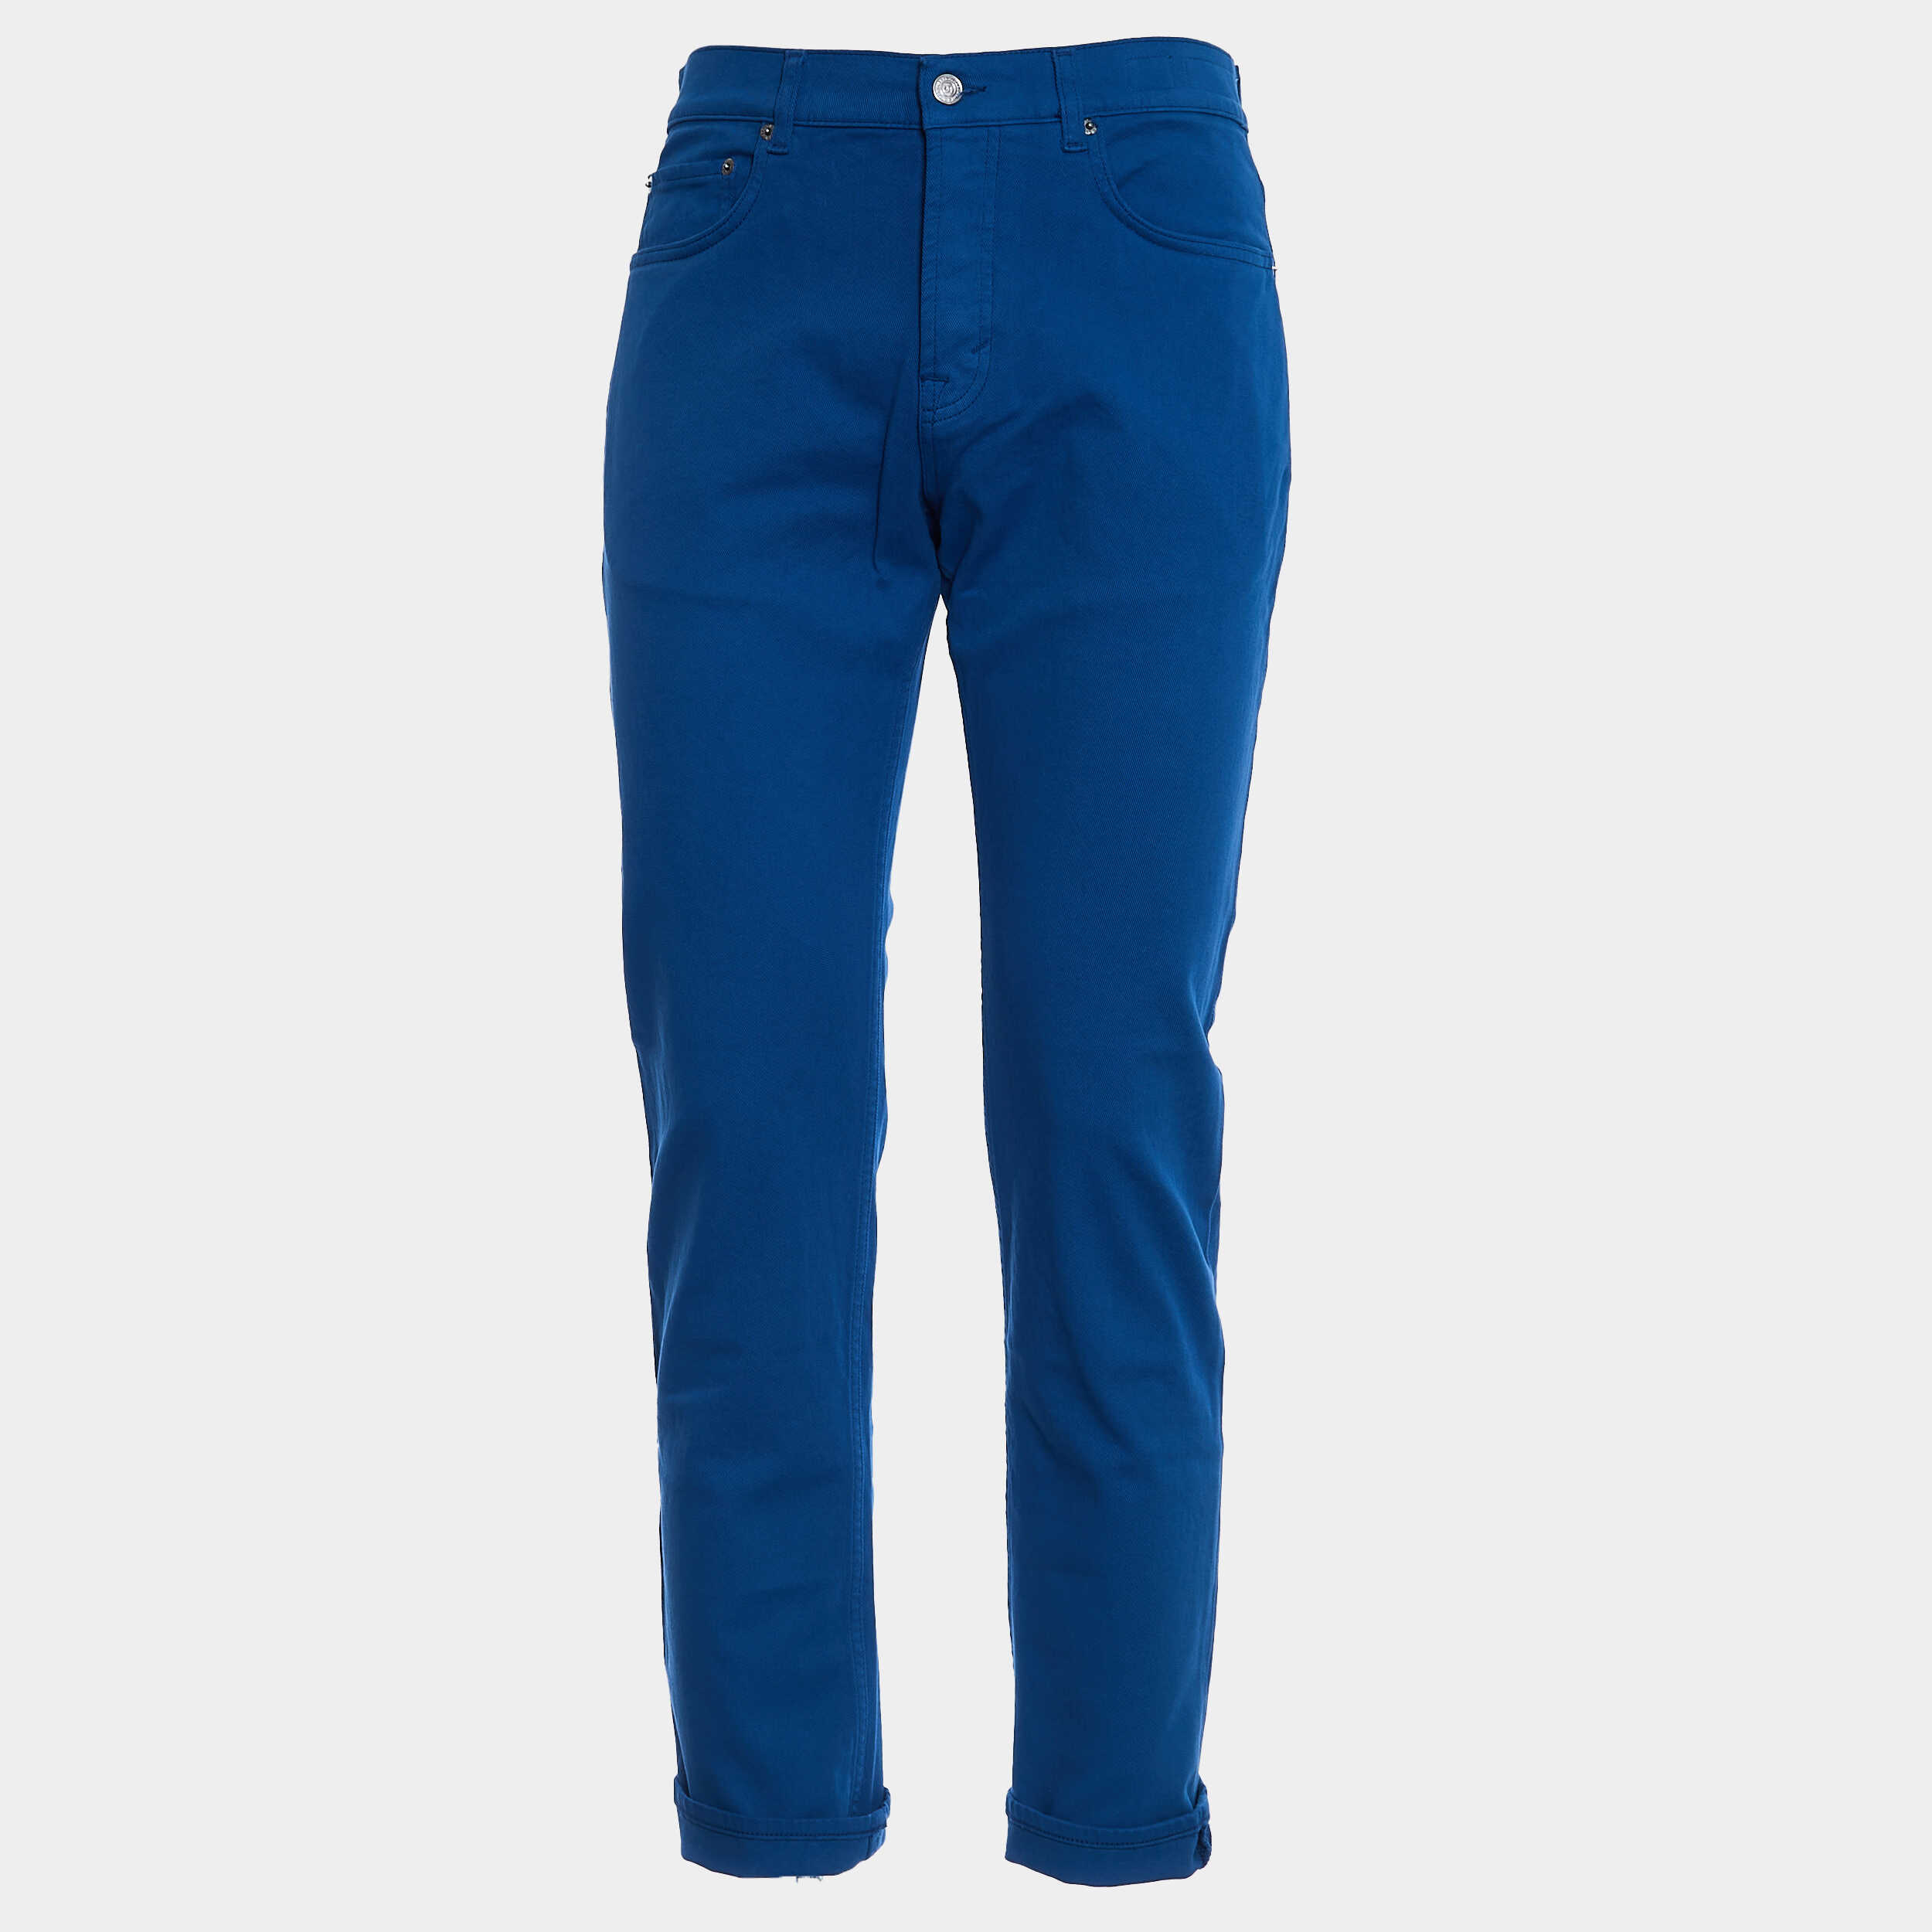 Department Five Keith Five Pocket Jeans Blue